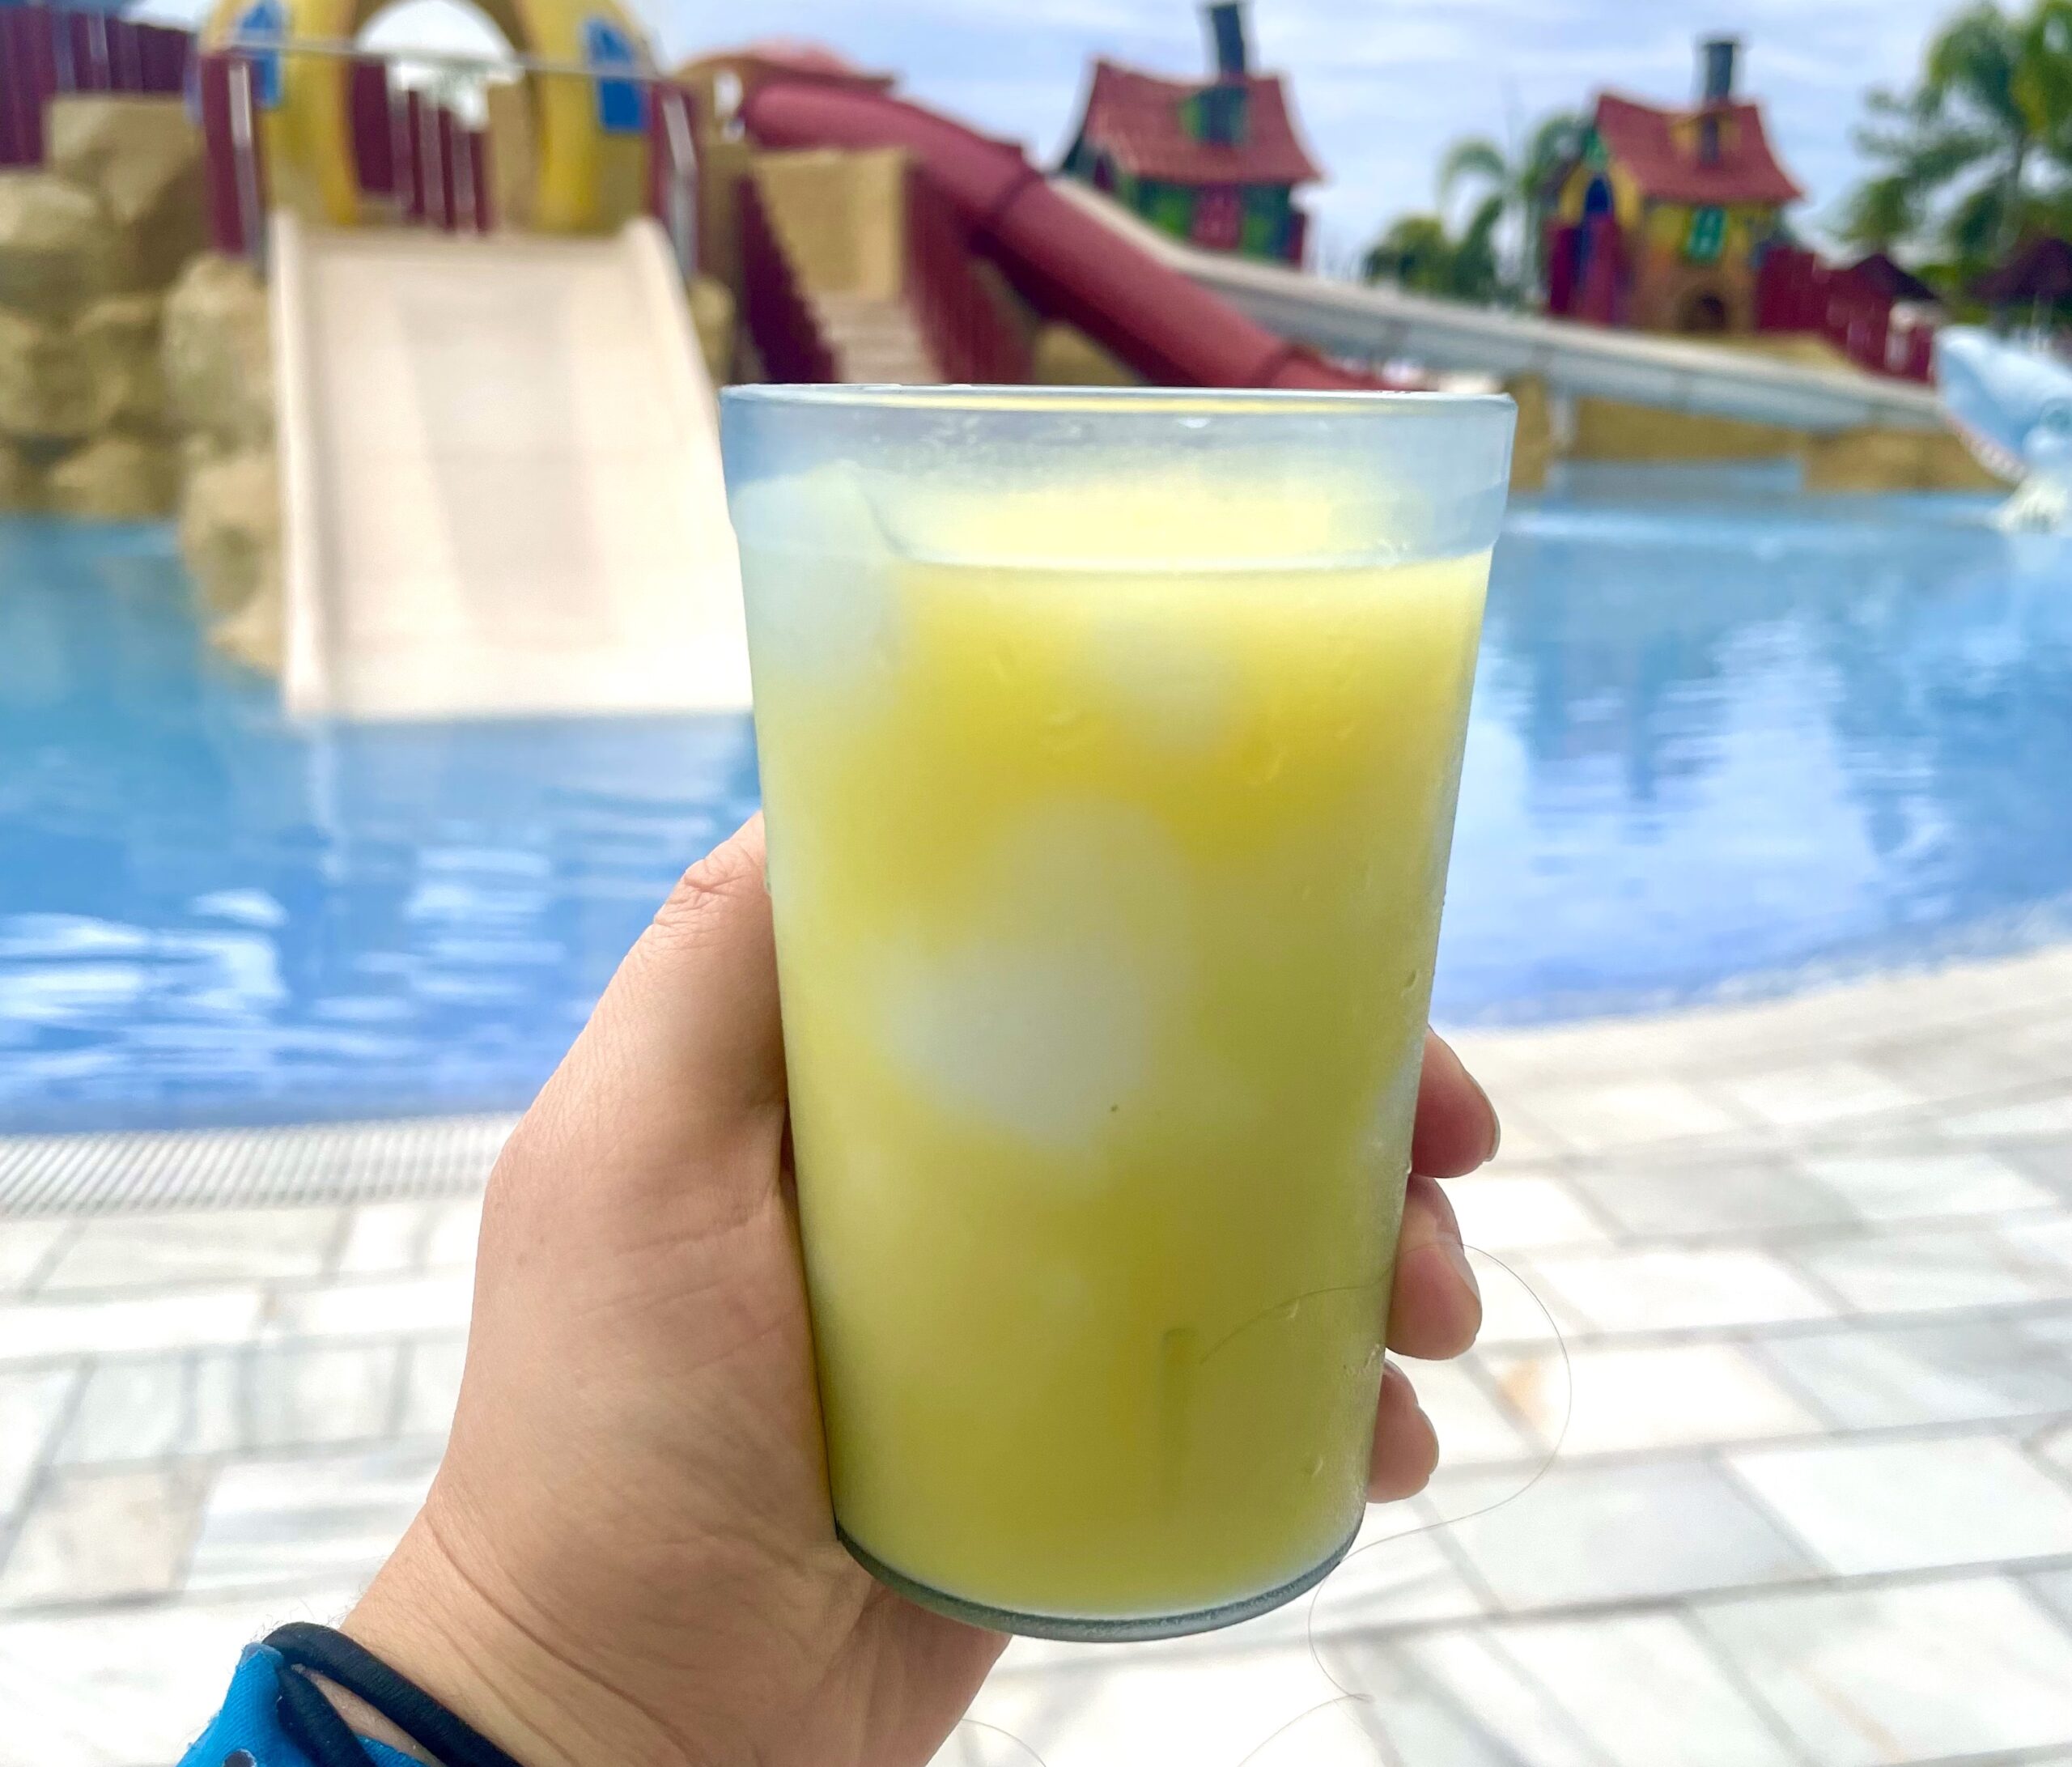 Hand holding a small plastic cup filled with pina colada and orange juice in Jamaica in front of a children's water slide area.